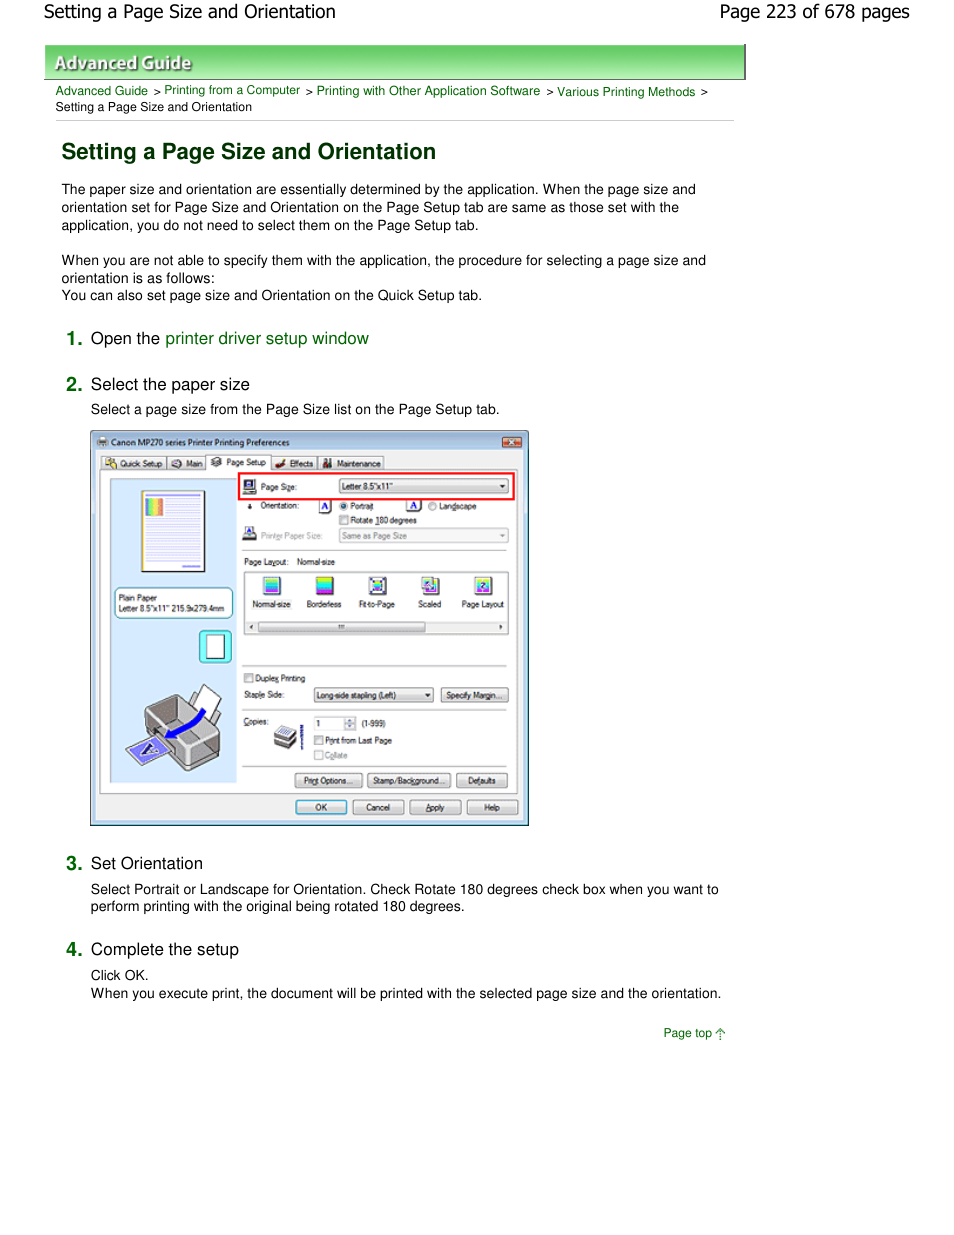 Setting a page size and orientation | Canon PIXMA MP250 User Manual | Page 223 / 678